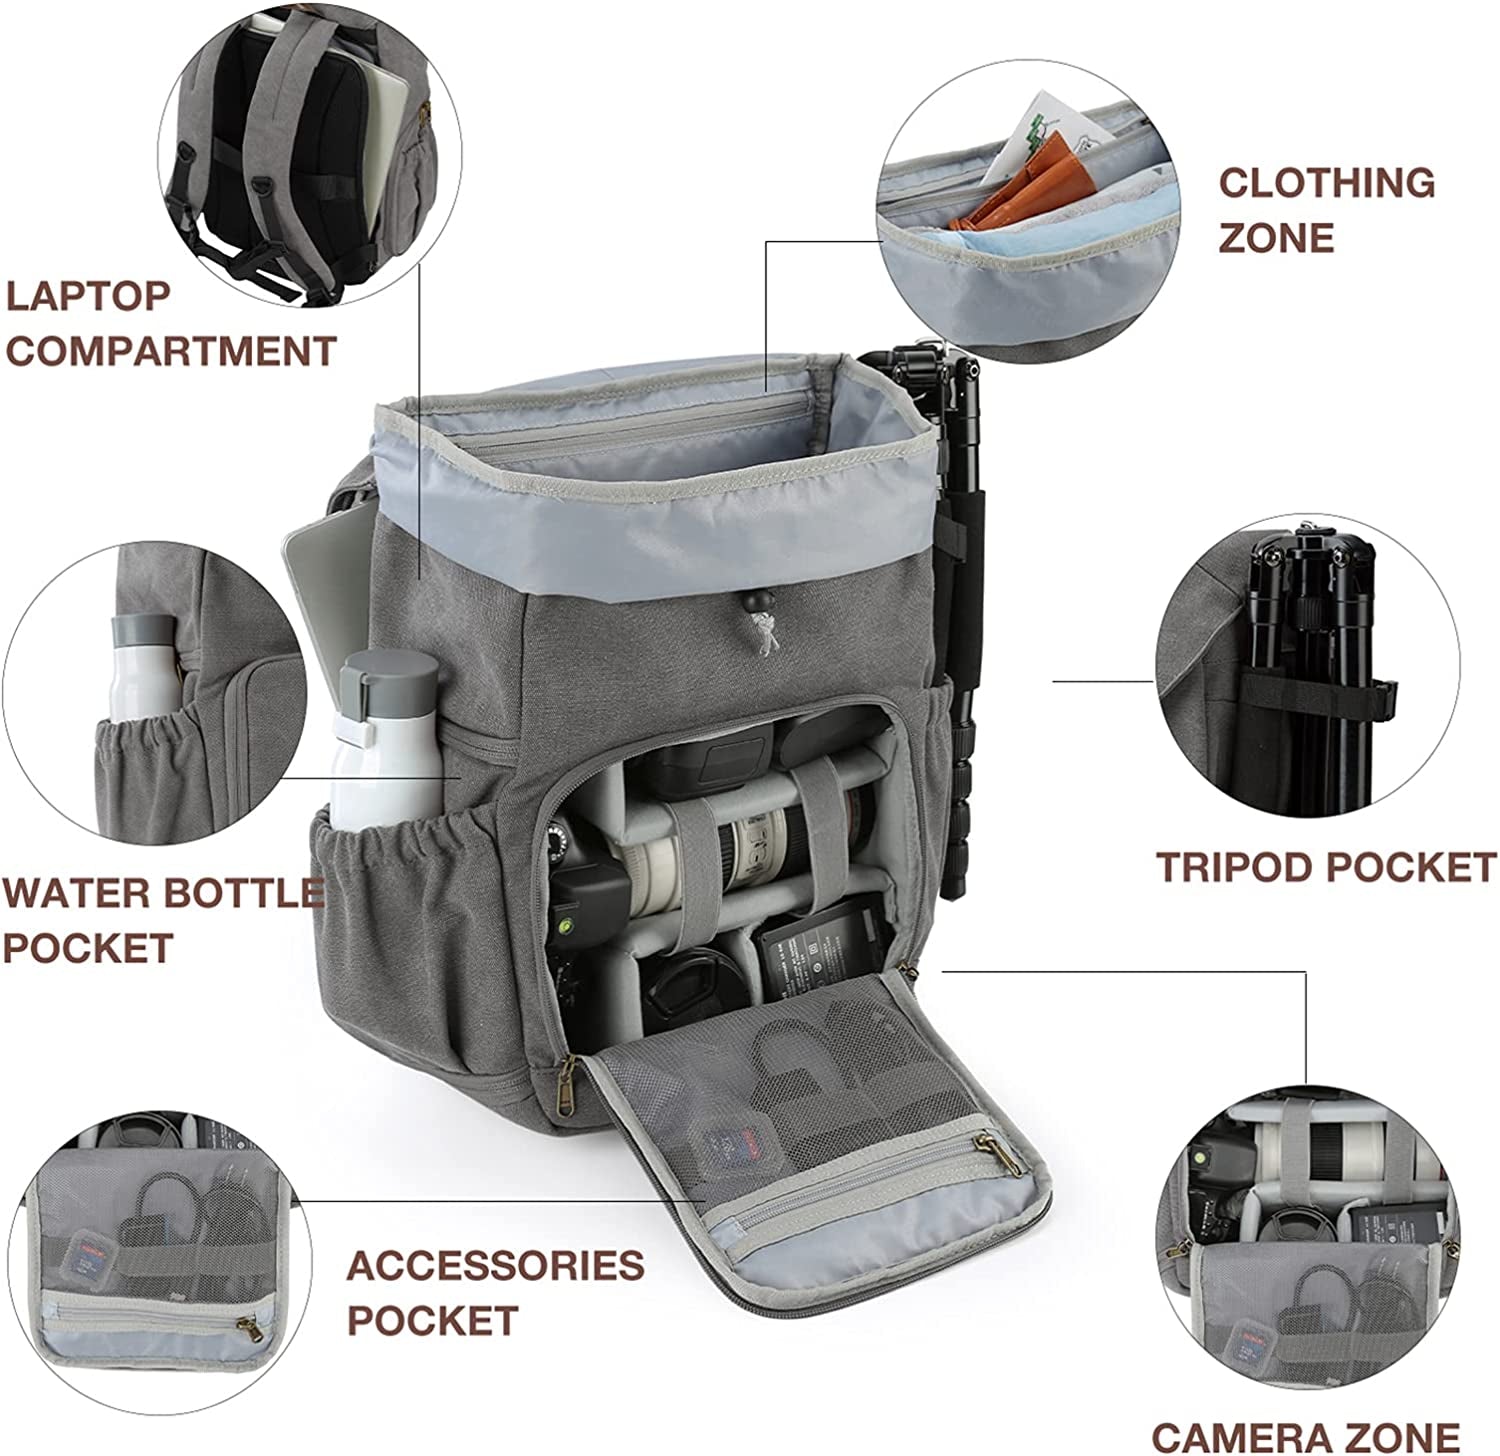 Camera Backpack, BAGSMAR DSLR Camera Bag Backpack, Anti-Theft and Waterproof Camera Backpack for Photographers, Fit up to 15" Laptop with Rain Cover, Grey